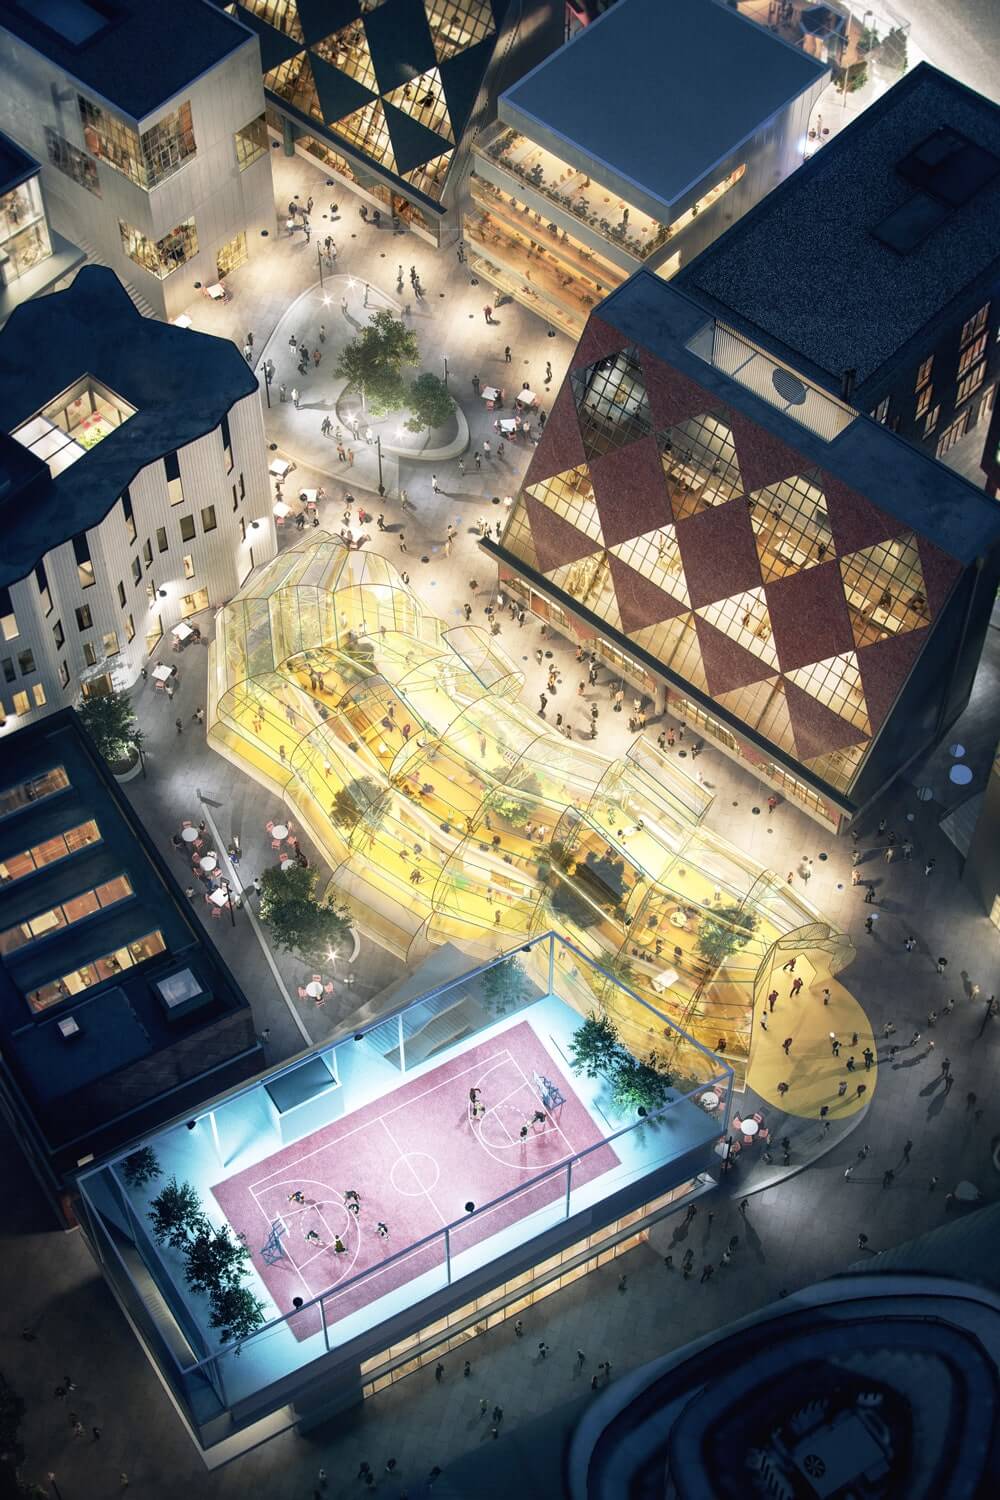 How will the New London’s Design District look